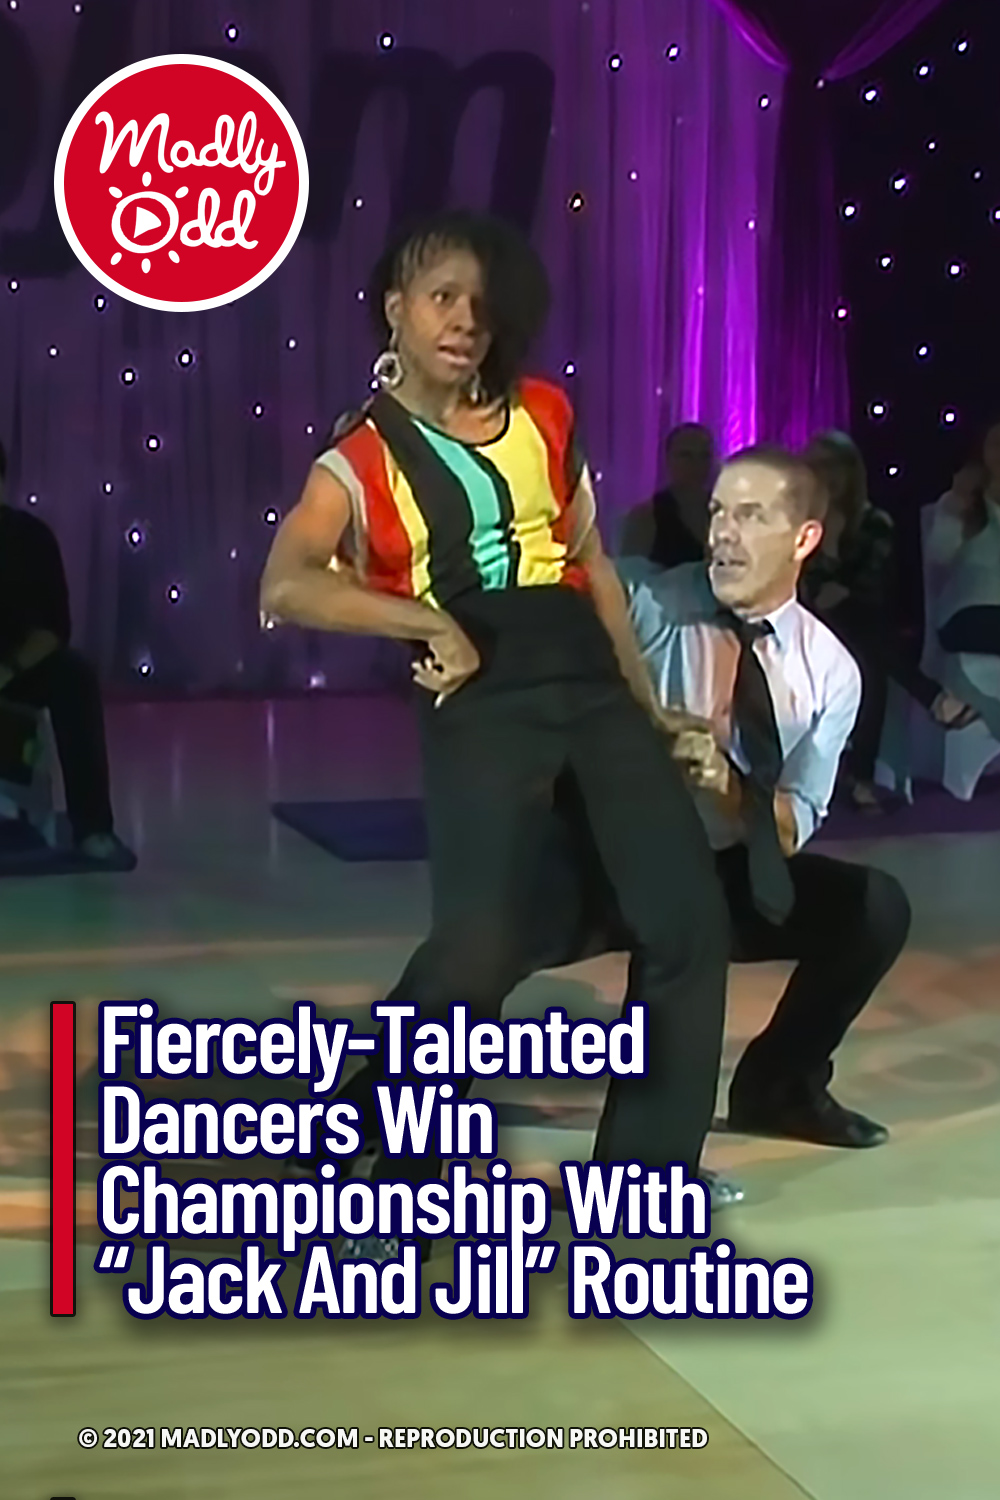 Fiercely-Talented Dancers Win Championship With “Jack And Jill” Routine